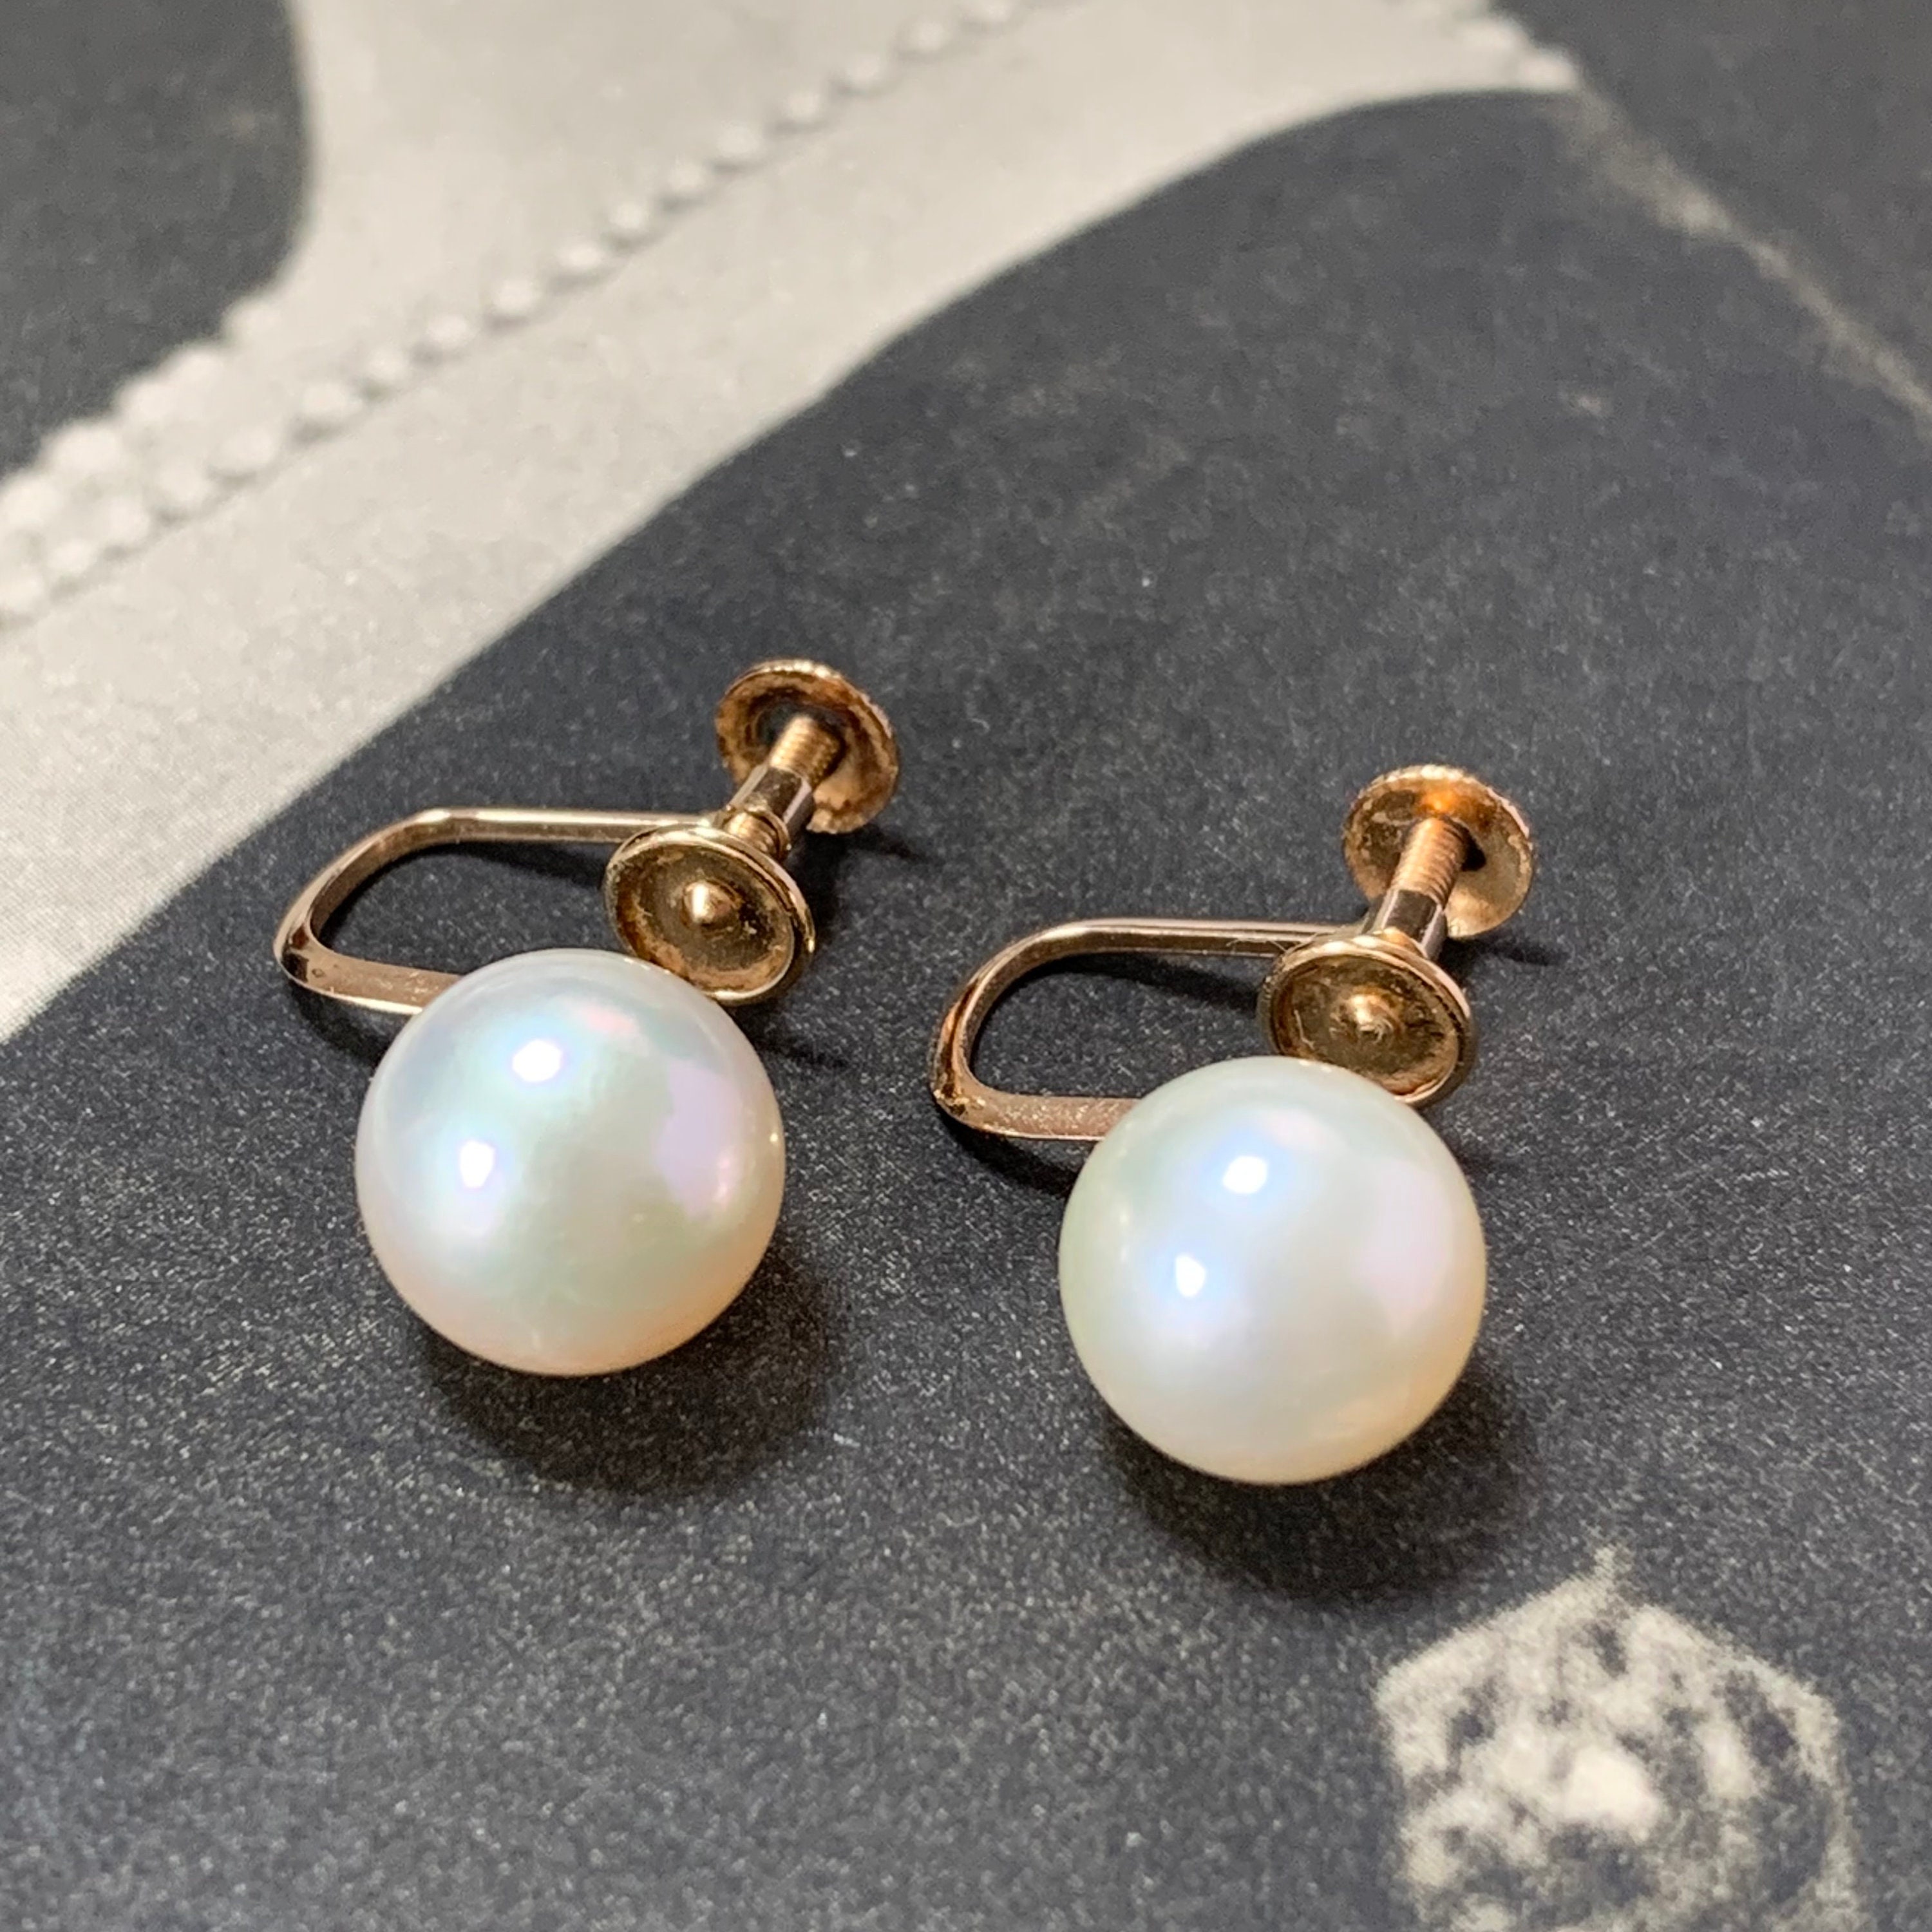 Vintage Pearl Screwback Earrings With Large 8.2mm Akoya Pearls Set in 18Ct Gold. Beautiful Quality Mid Century